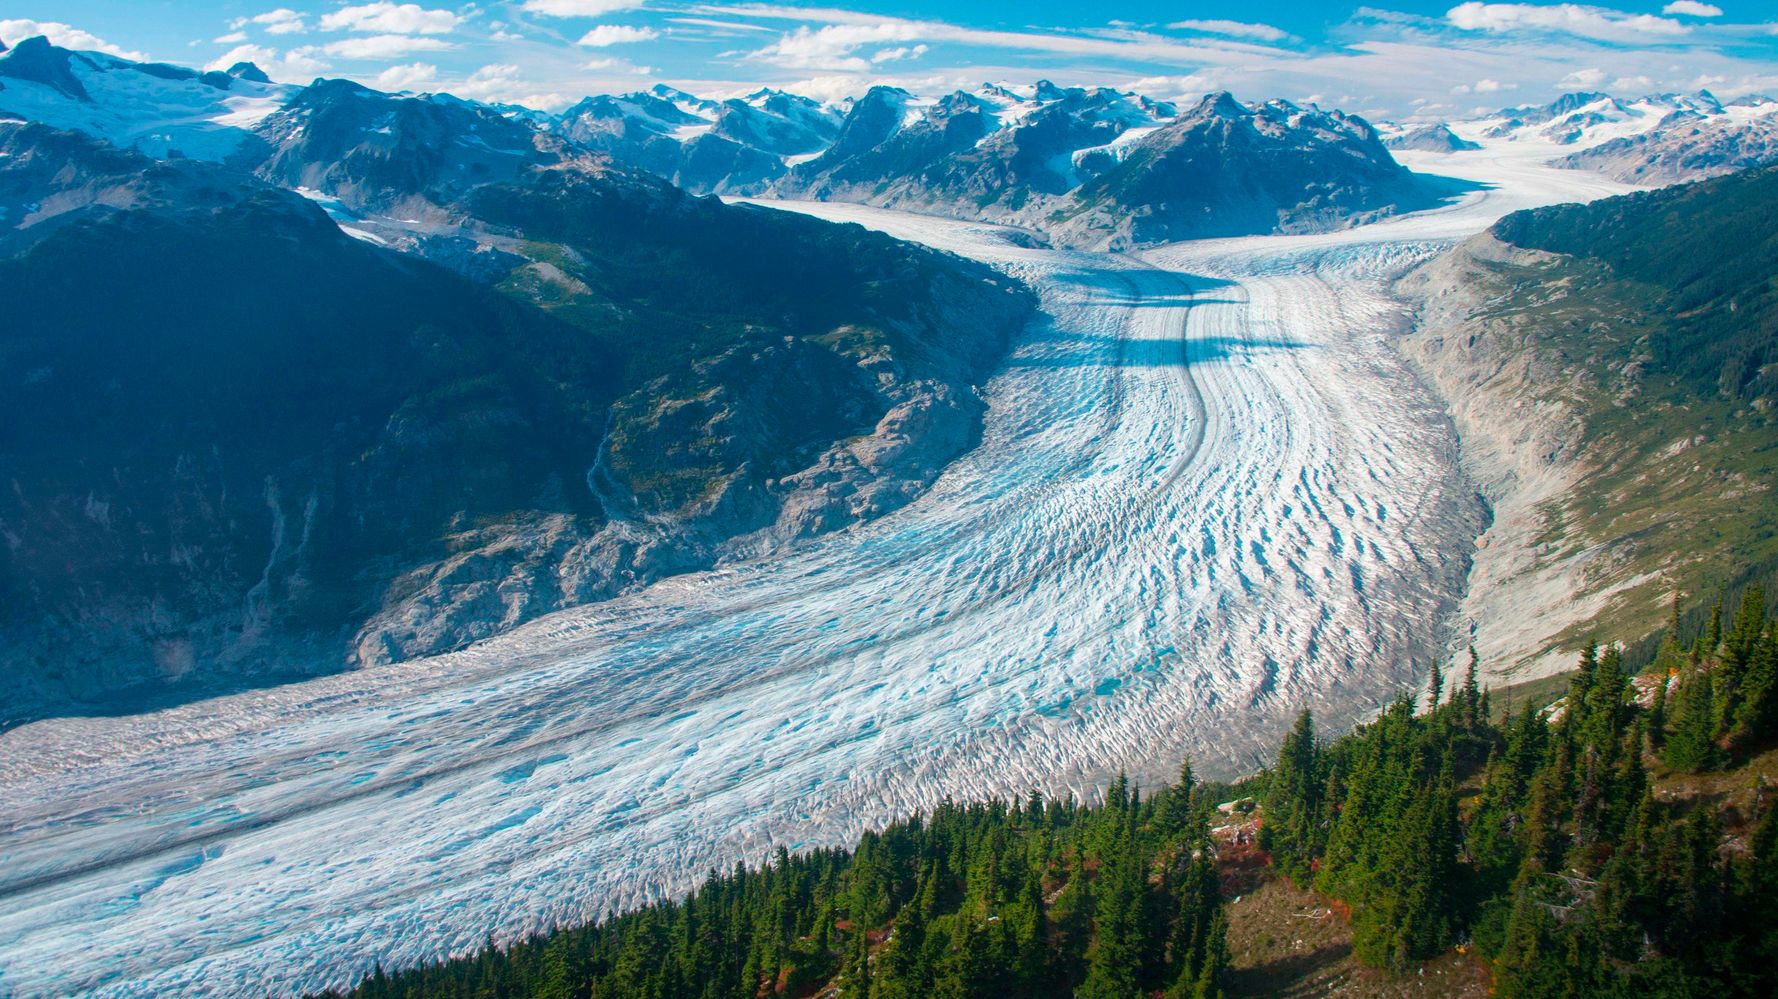 Earth's Glaciers Are Melting Faster Than Ever, Satellites Show